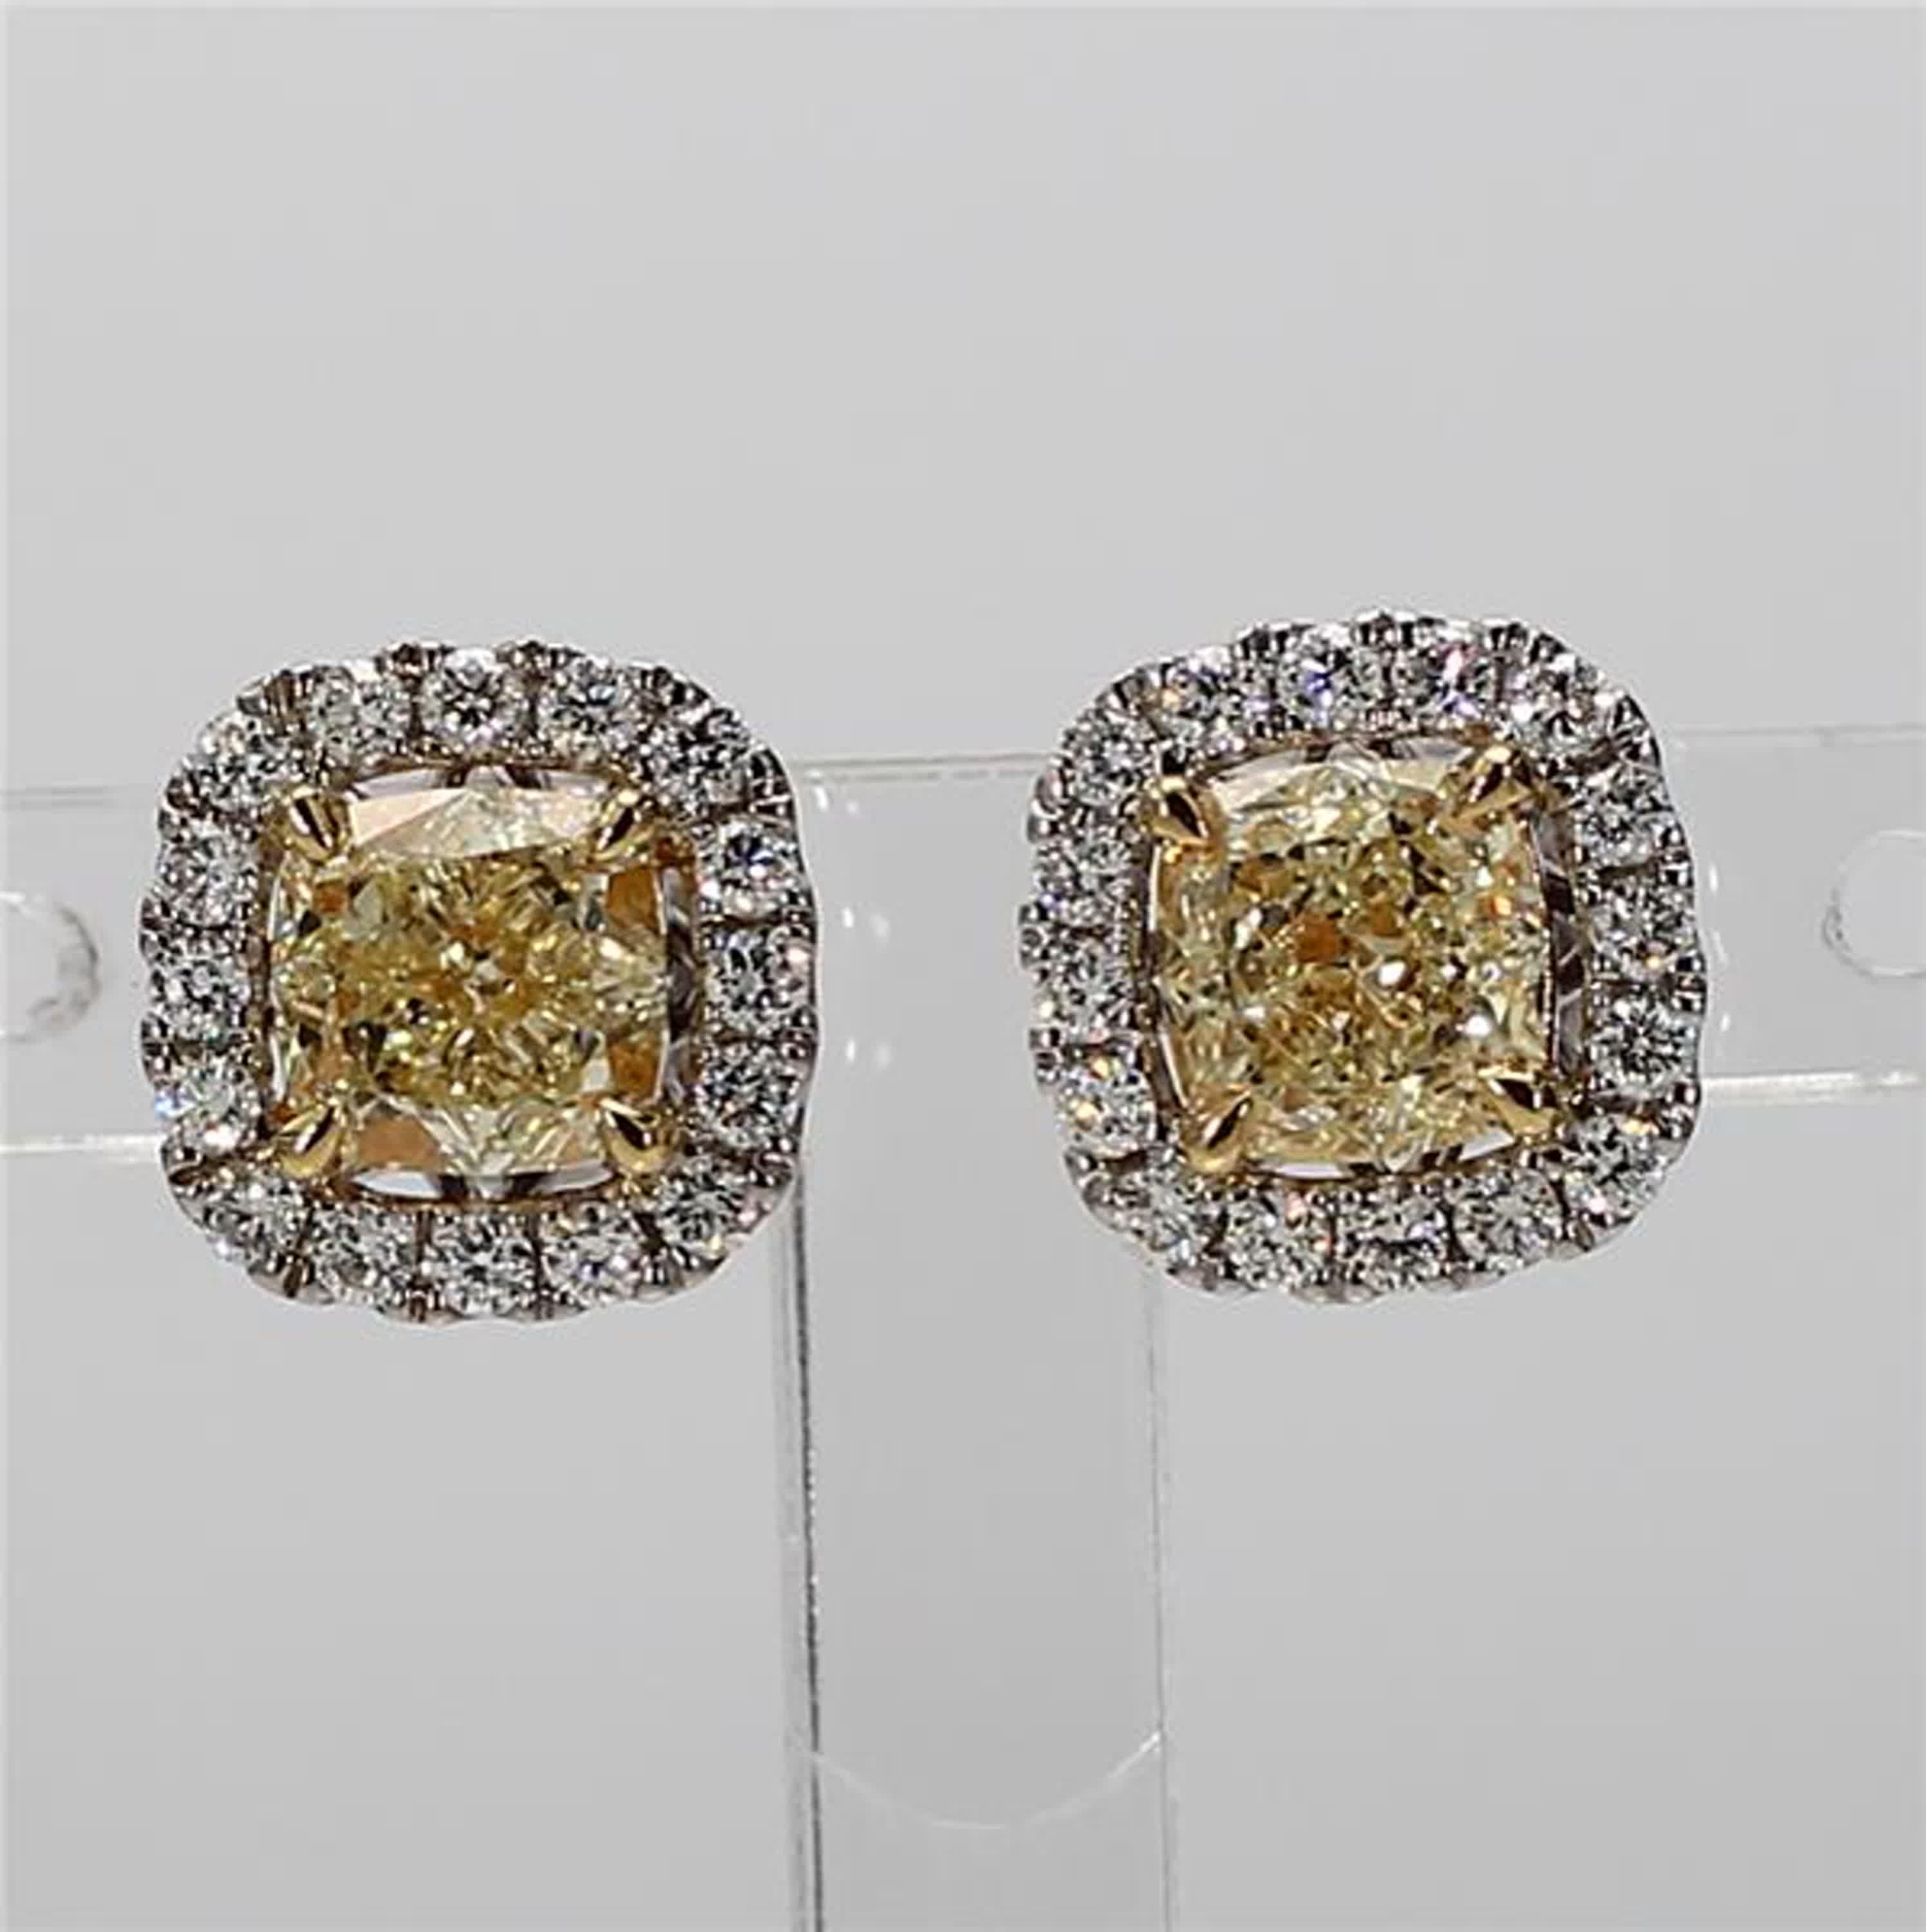 RareGemWorld's classic natural cushion cut yellow diamond earrings. Mounted in a beautiful 18K Yellow and White Gold setting with natural cushion cut yellow diamonds. The yellow diamonds are surrounded by small round natural white diamond melee.